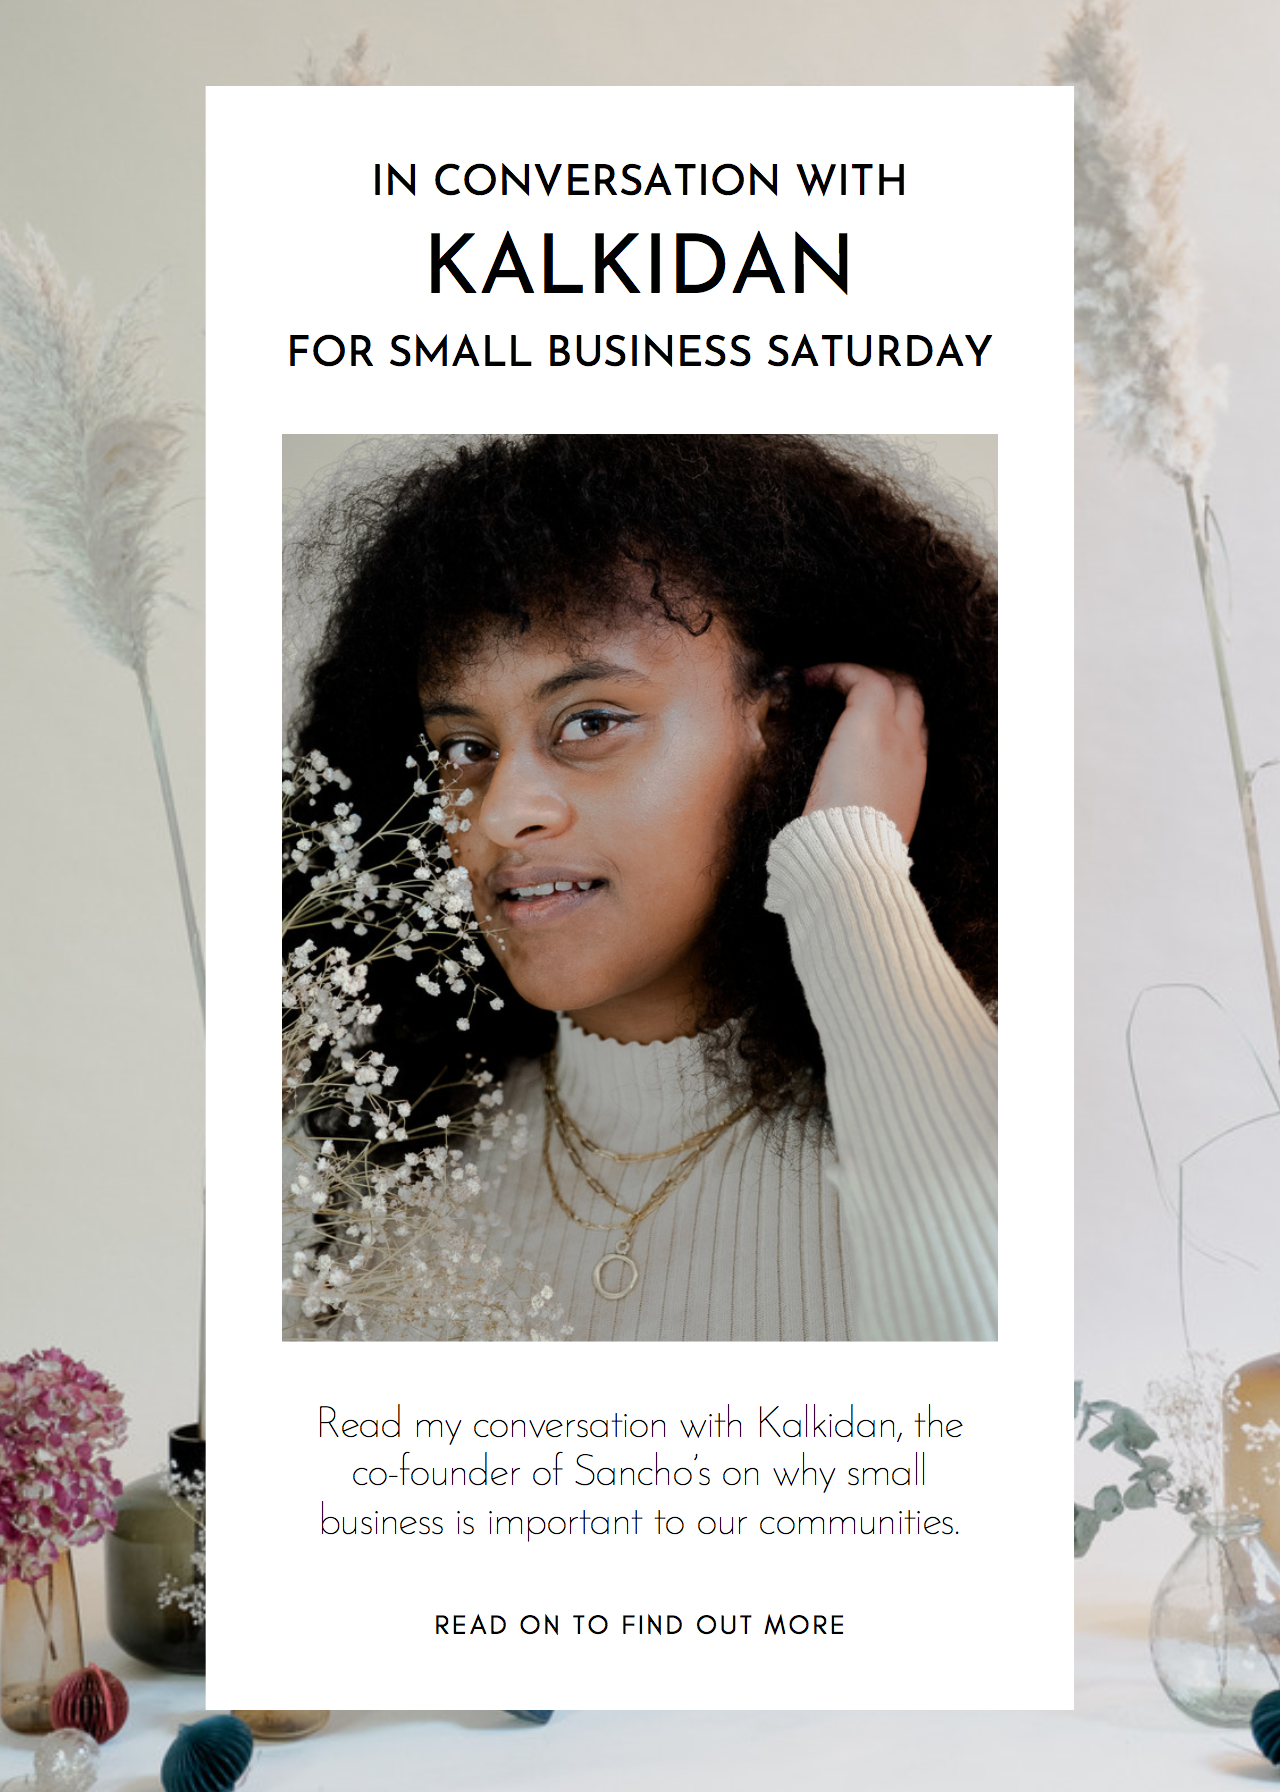 In conversation with Kalkidan for Small Business Saturday